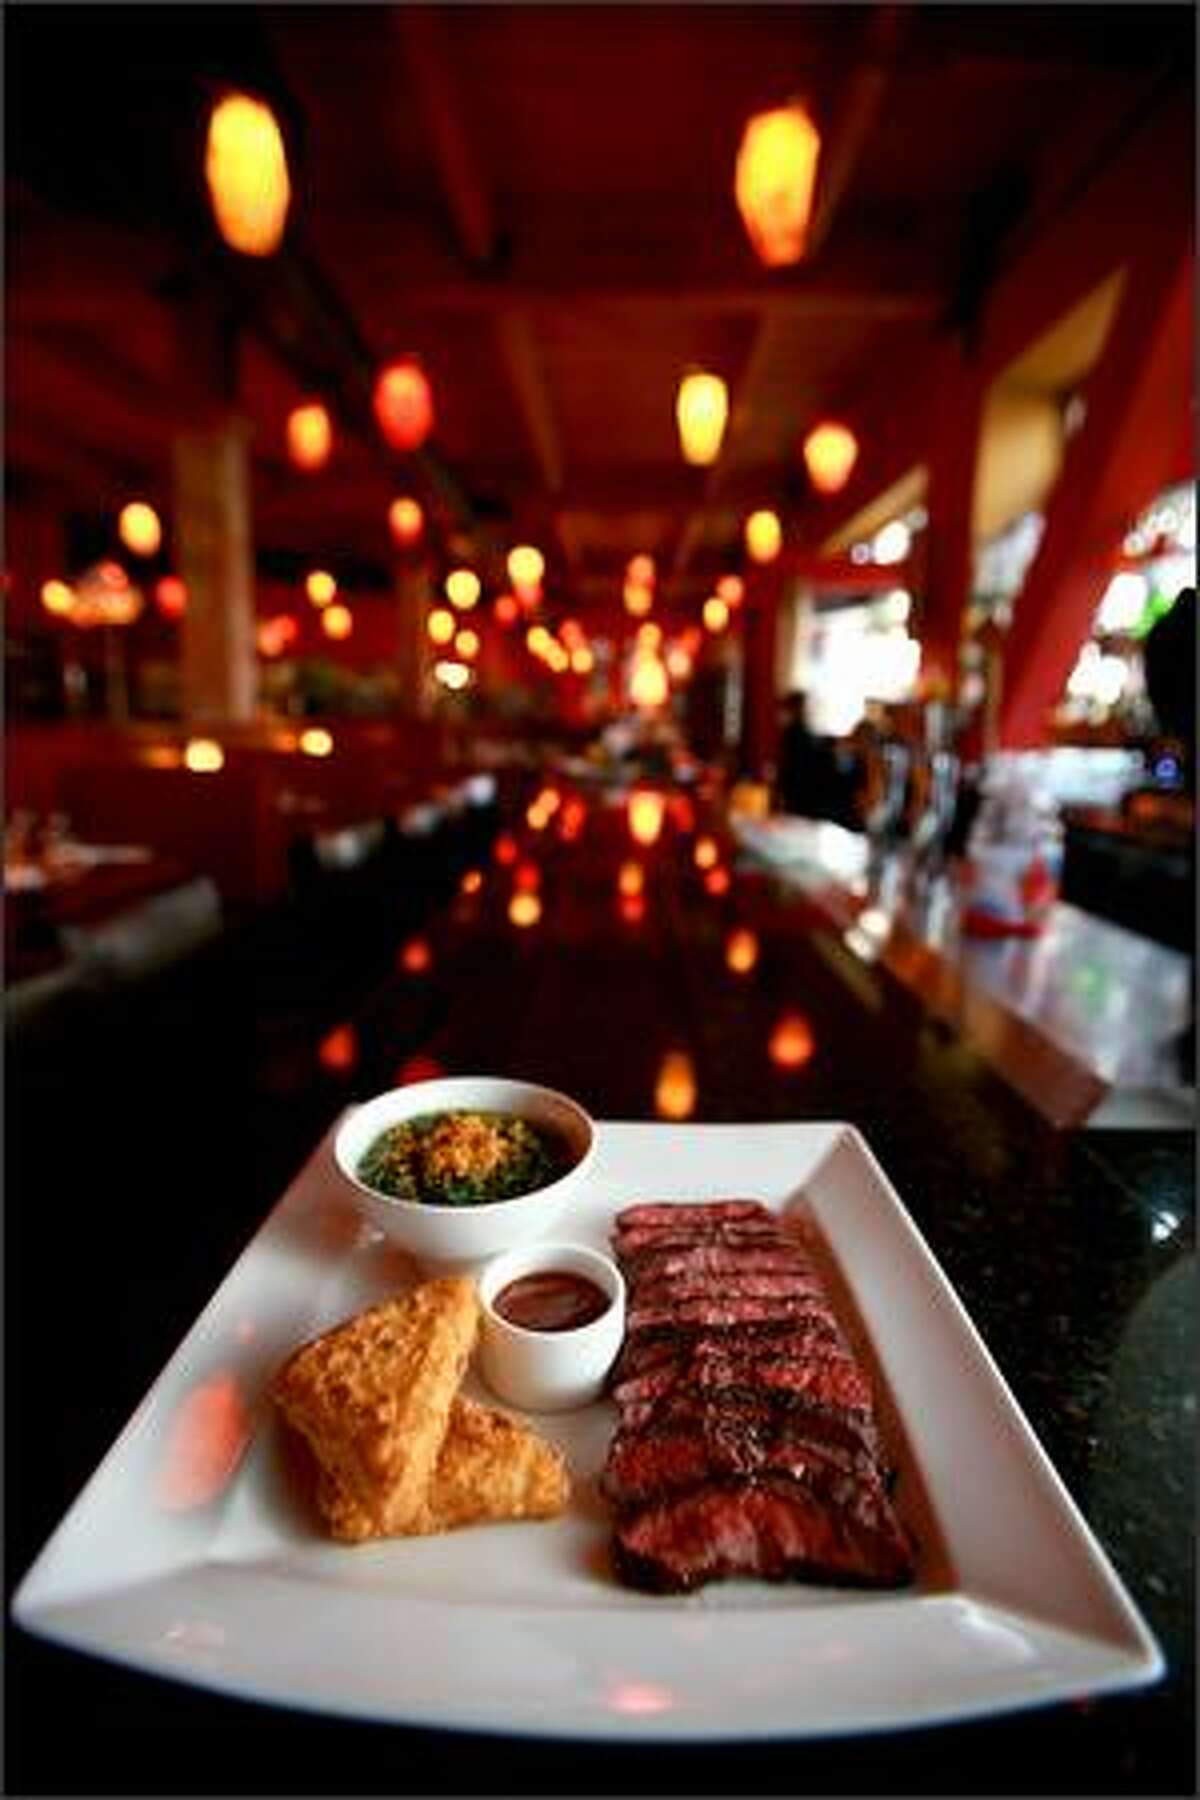 A tender flat-iron steak is served beside golden wedges of crispy grits and a small bowl of creamed spinach.